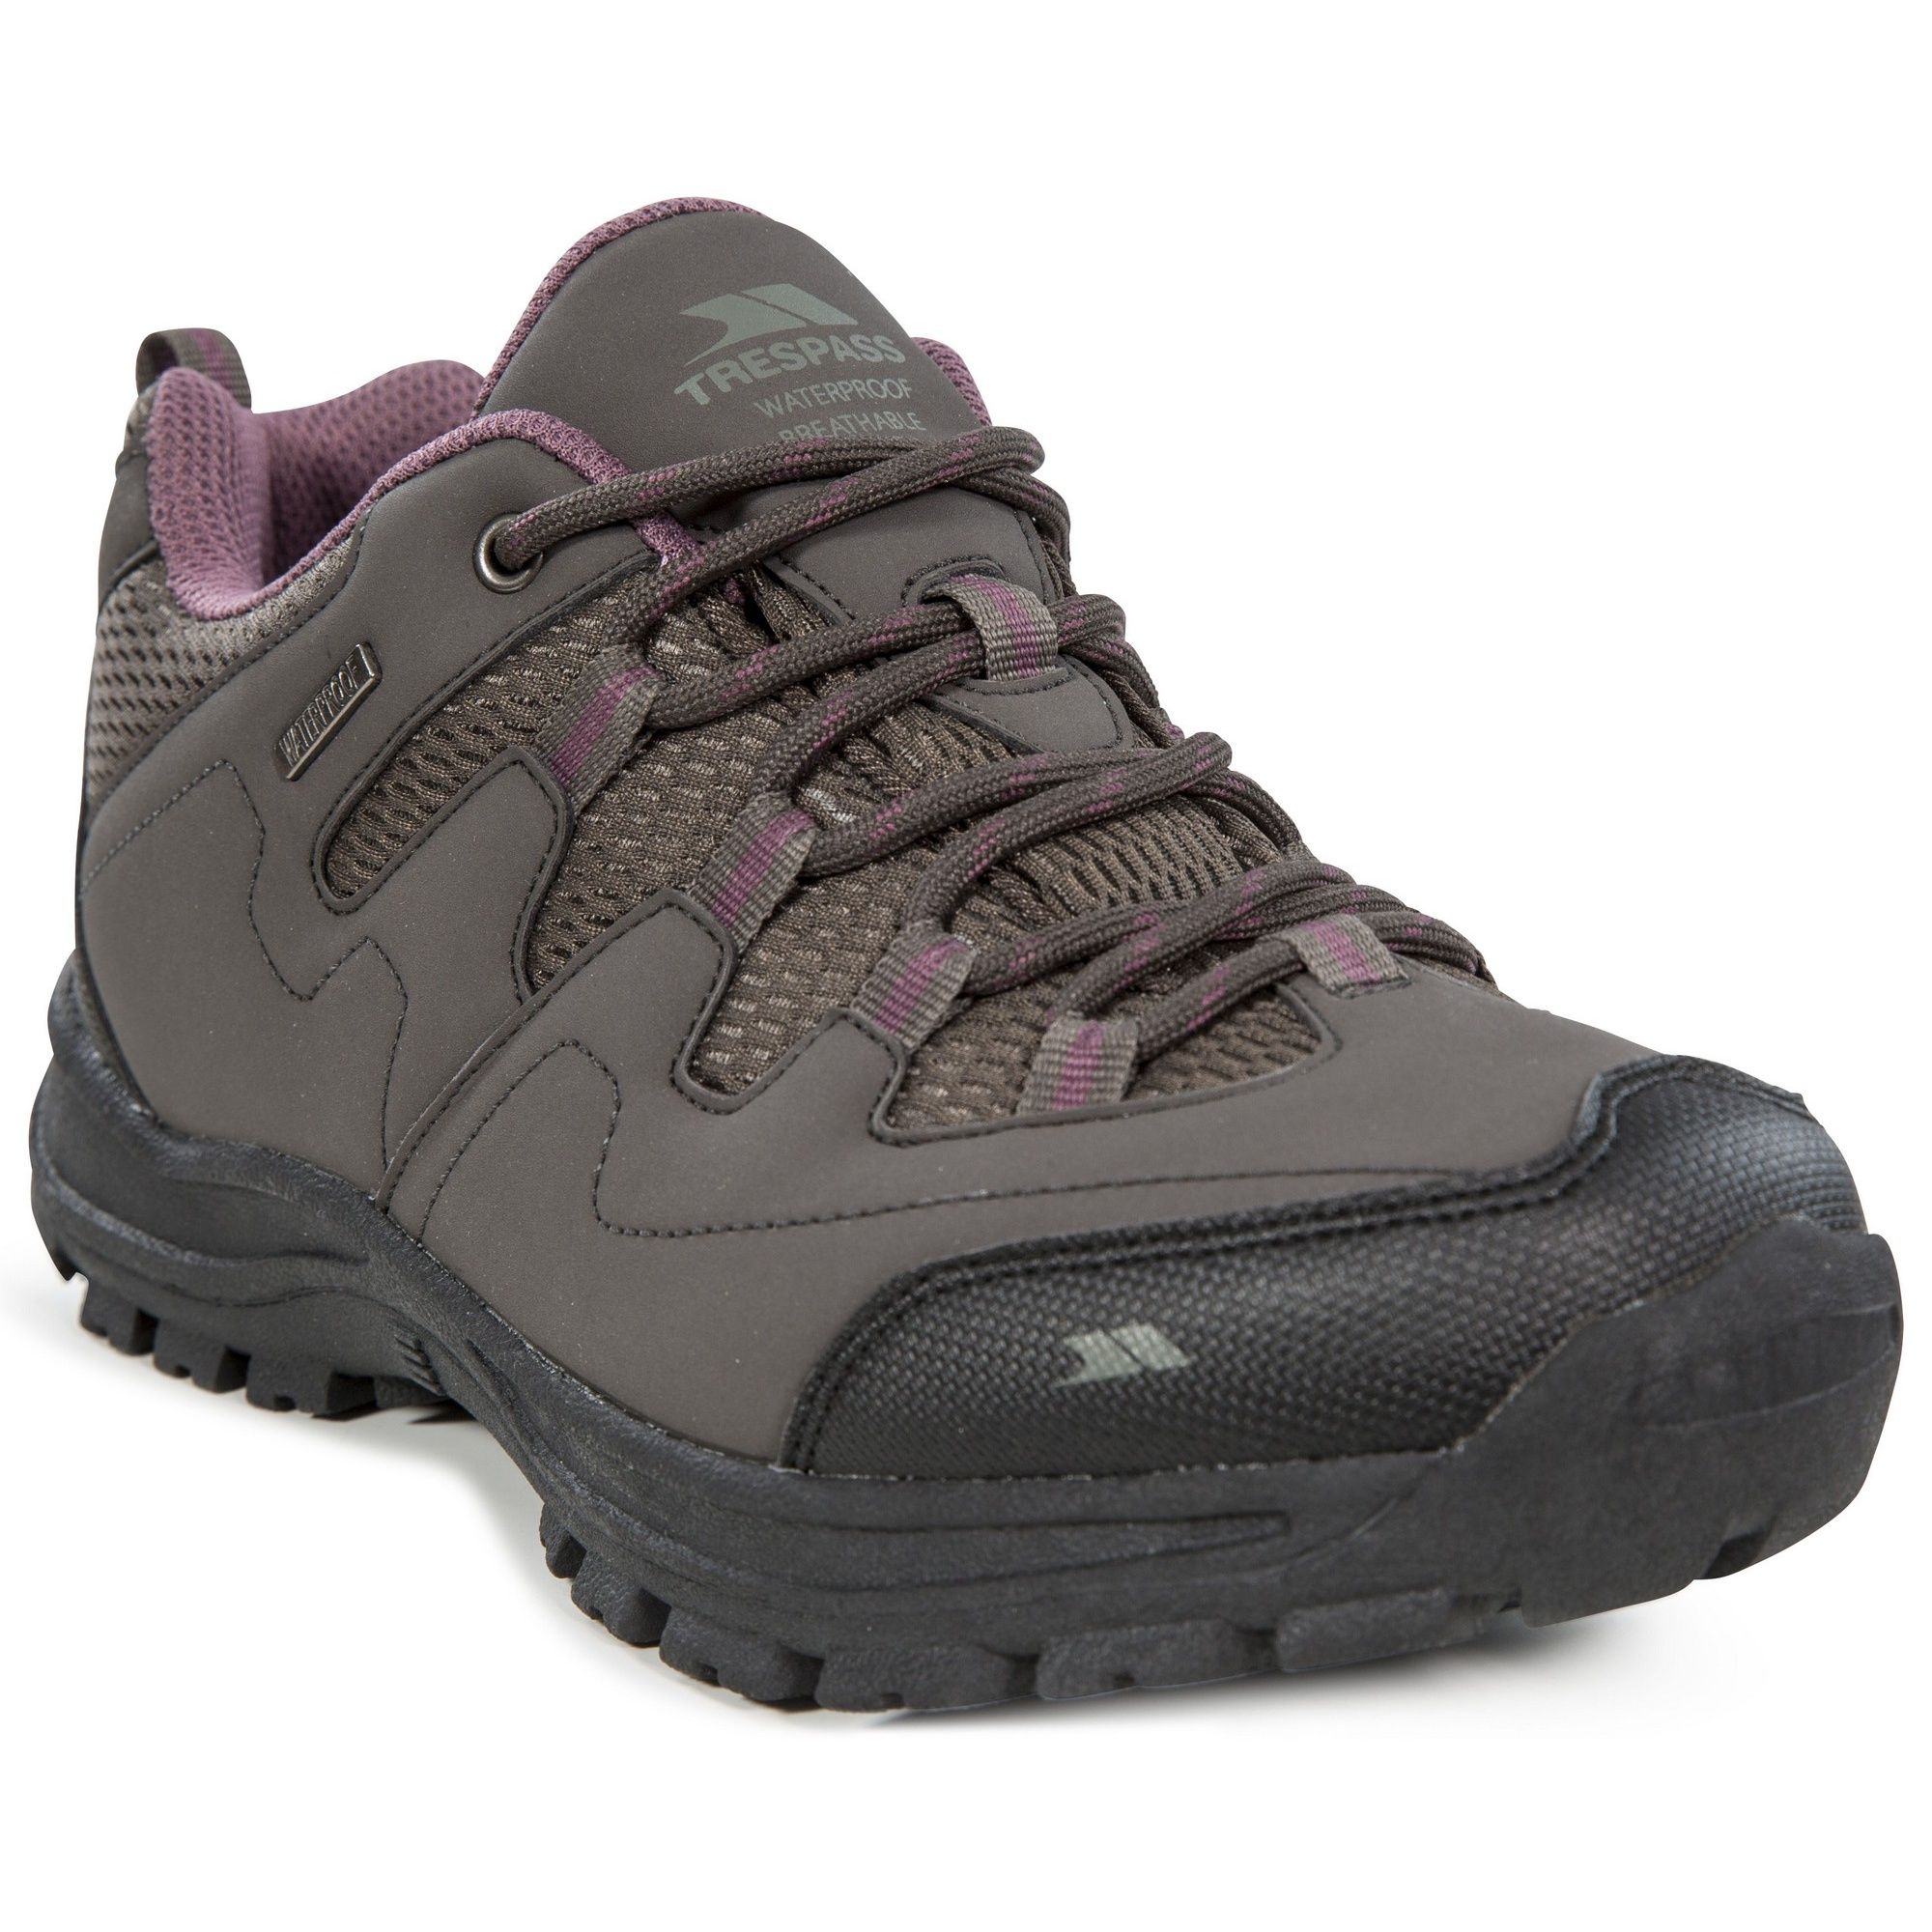 Upper: PU/Textile, Lining: Textile, Outsole: TPR. Walking low cut. Waterproof and breathable membrane. Ankle supportive cushioned collar and tongue. Protective and durable toe and heel guard. Arch stabilising and supportive steel shank.